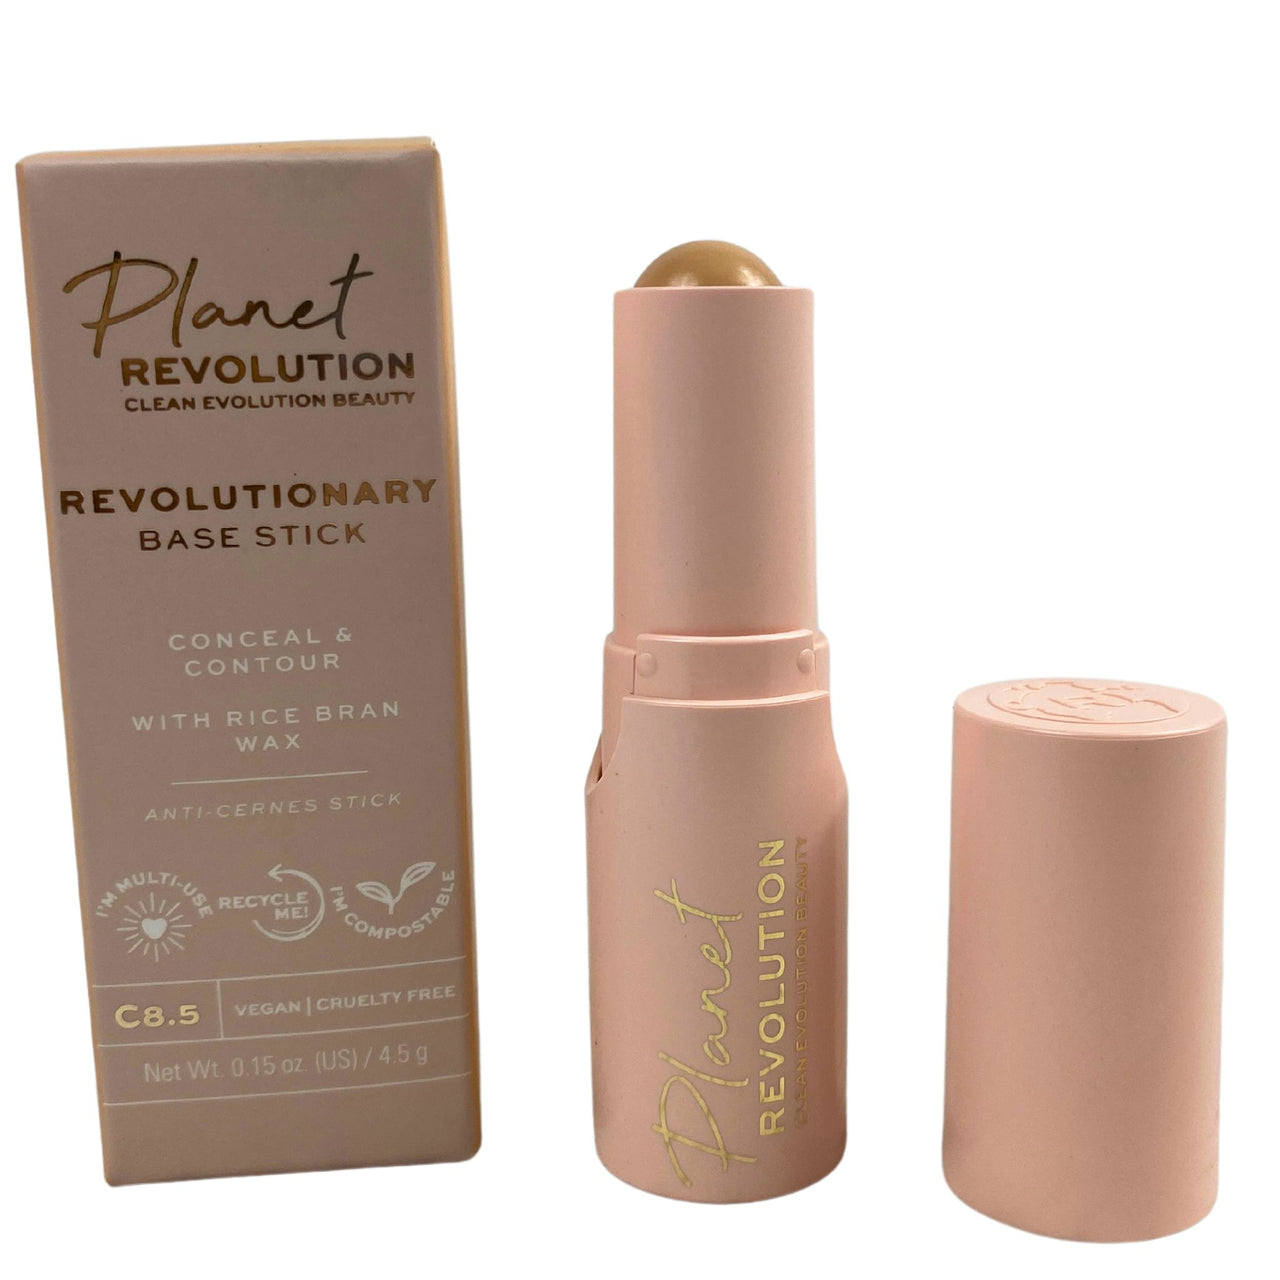 Planet Revolution Revolutionary Base Stick Conceal & Contour with Rice Bran Wax